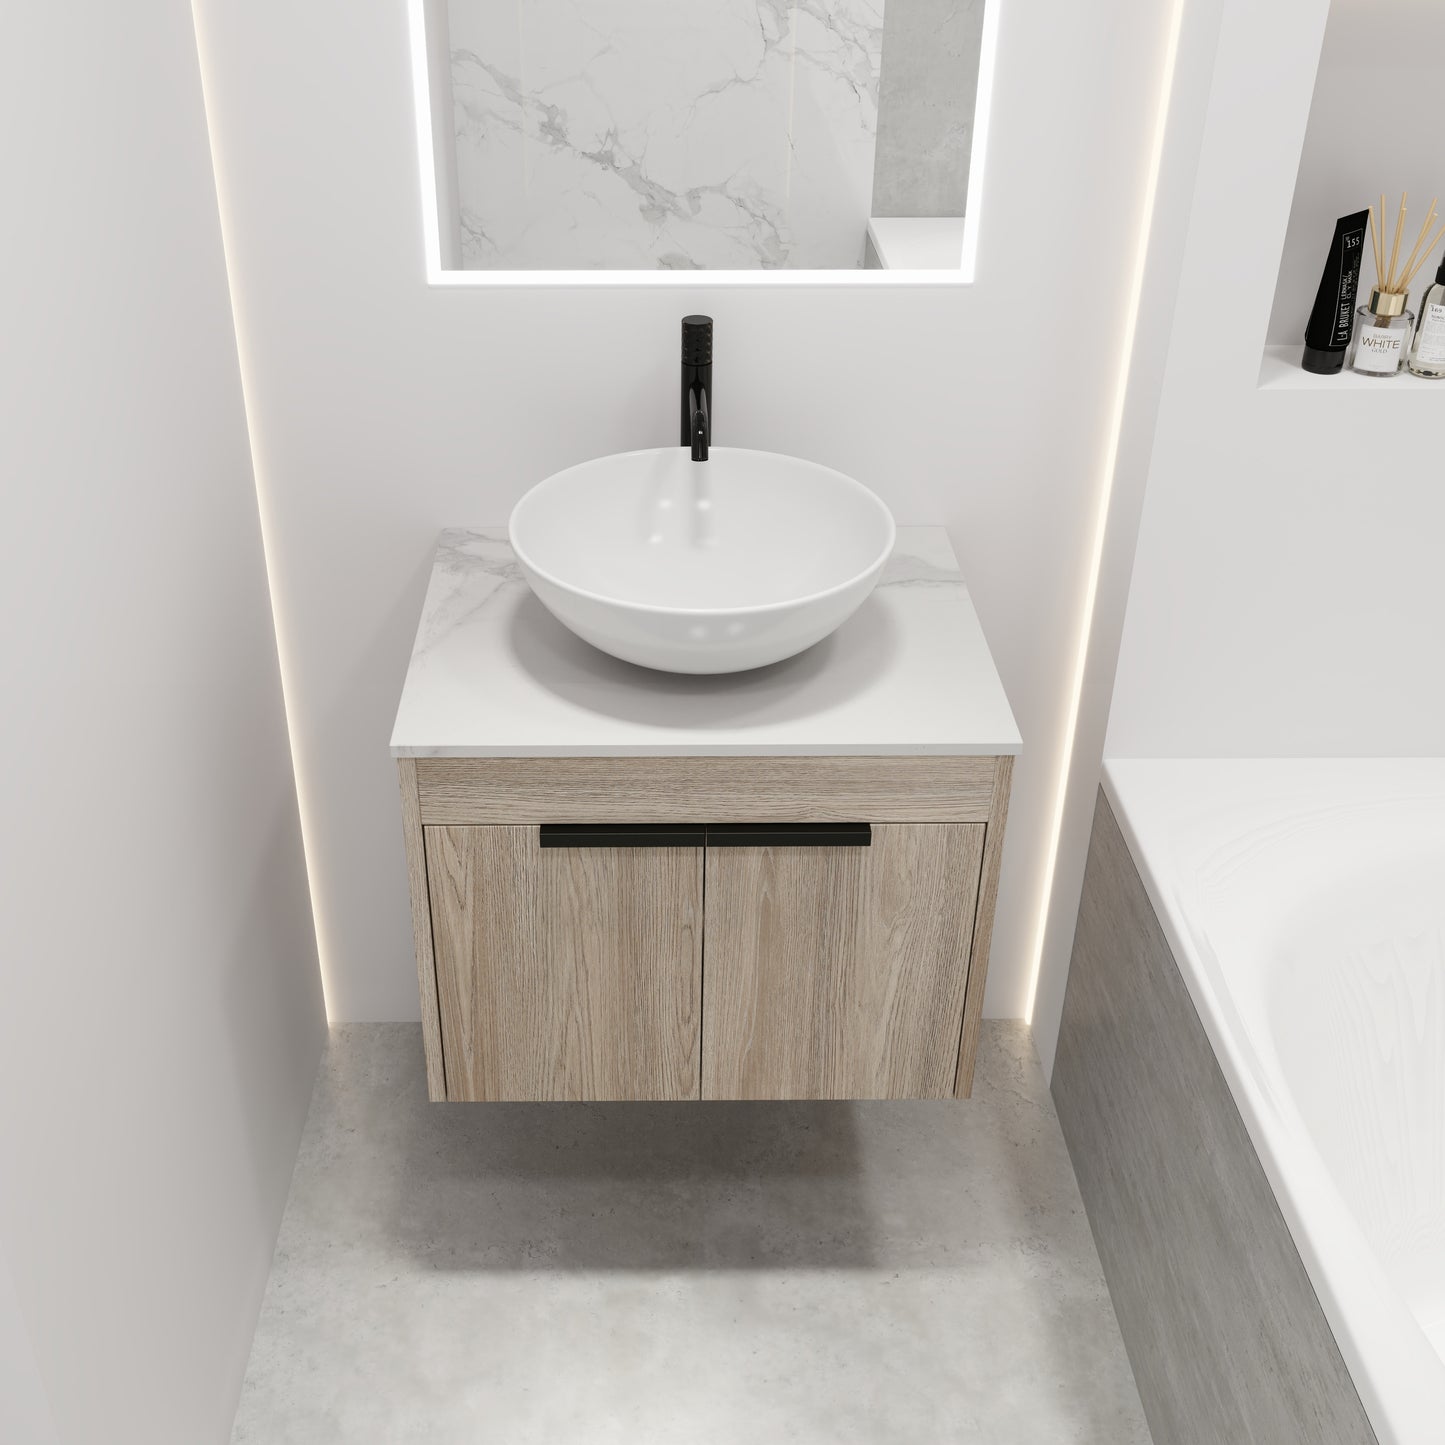 24 " Modern Design Float Bathroom Vanity With Ceramic Basin Set,  Wall Mounted White Oak Vanity  With Soft Close Door,KD-Packing，KD-Packing，2 Pieces Parcel（TOP-BAB321MOWH）